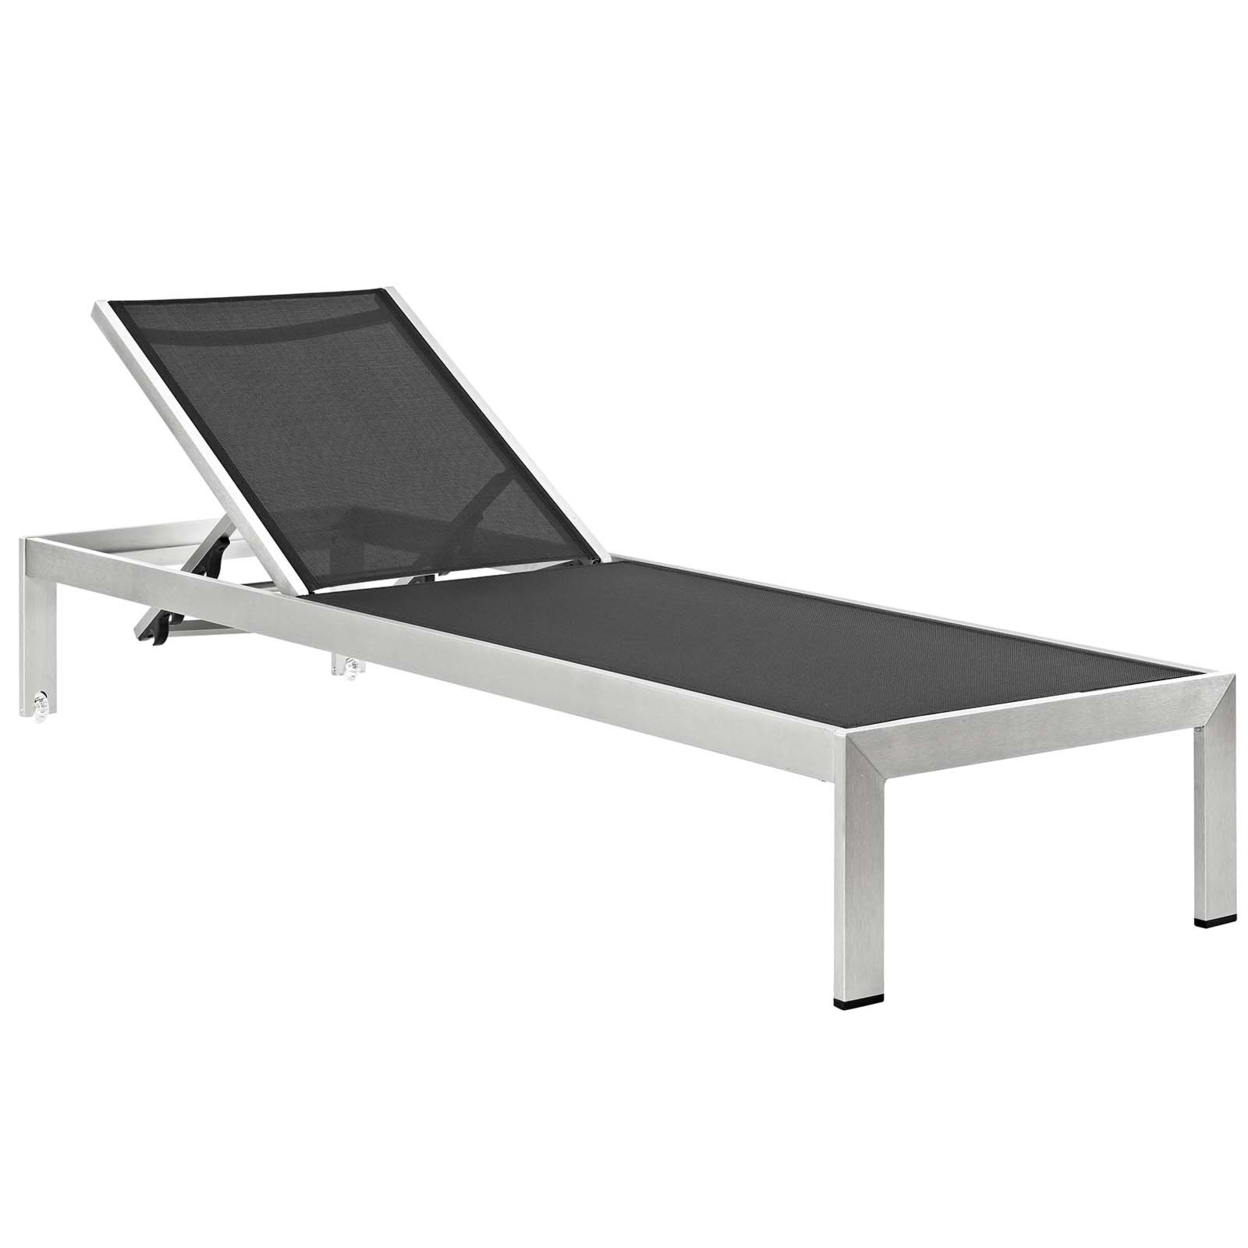 Shore Chaise With Cushions Outdoor Patio Aluminum Set Of 2, Silver Gray